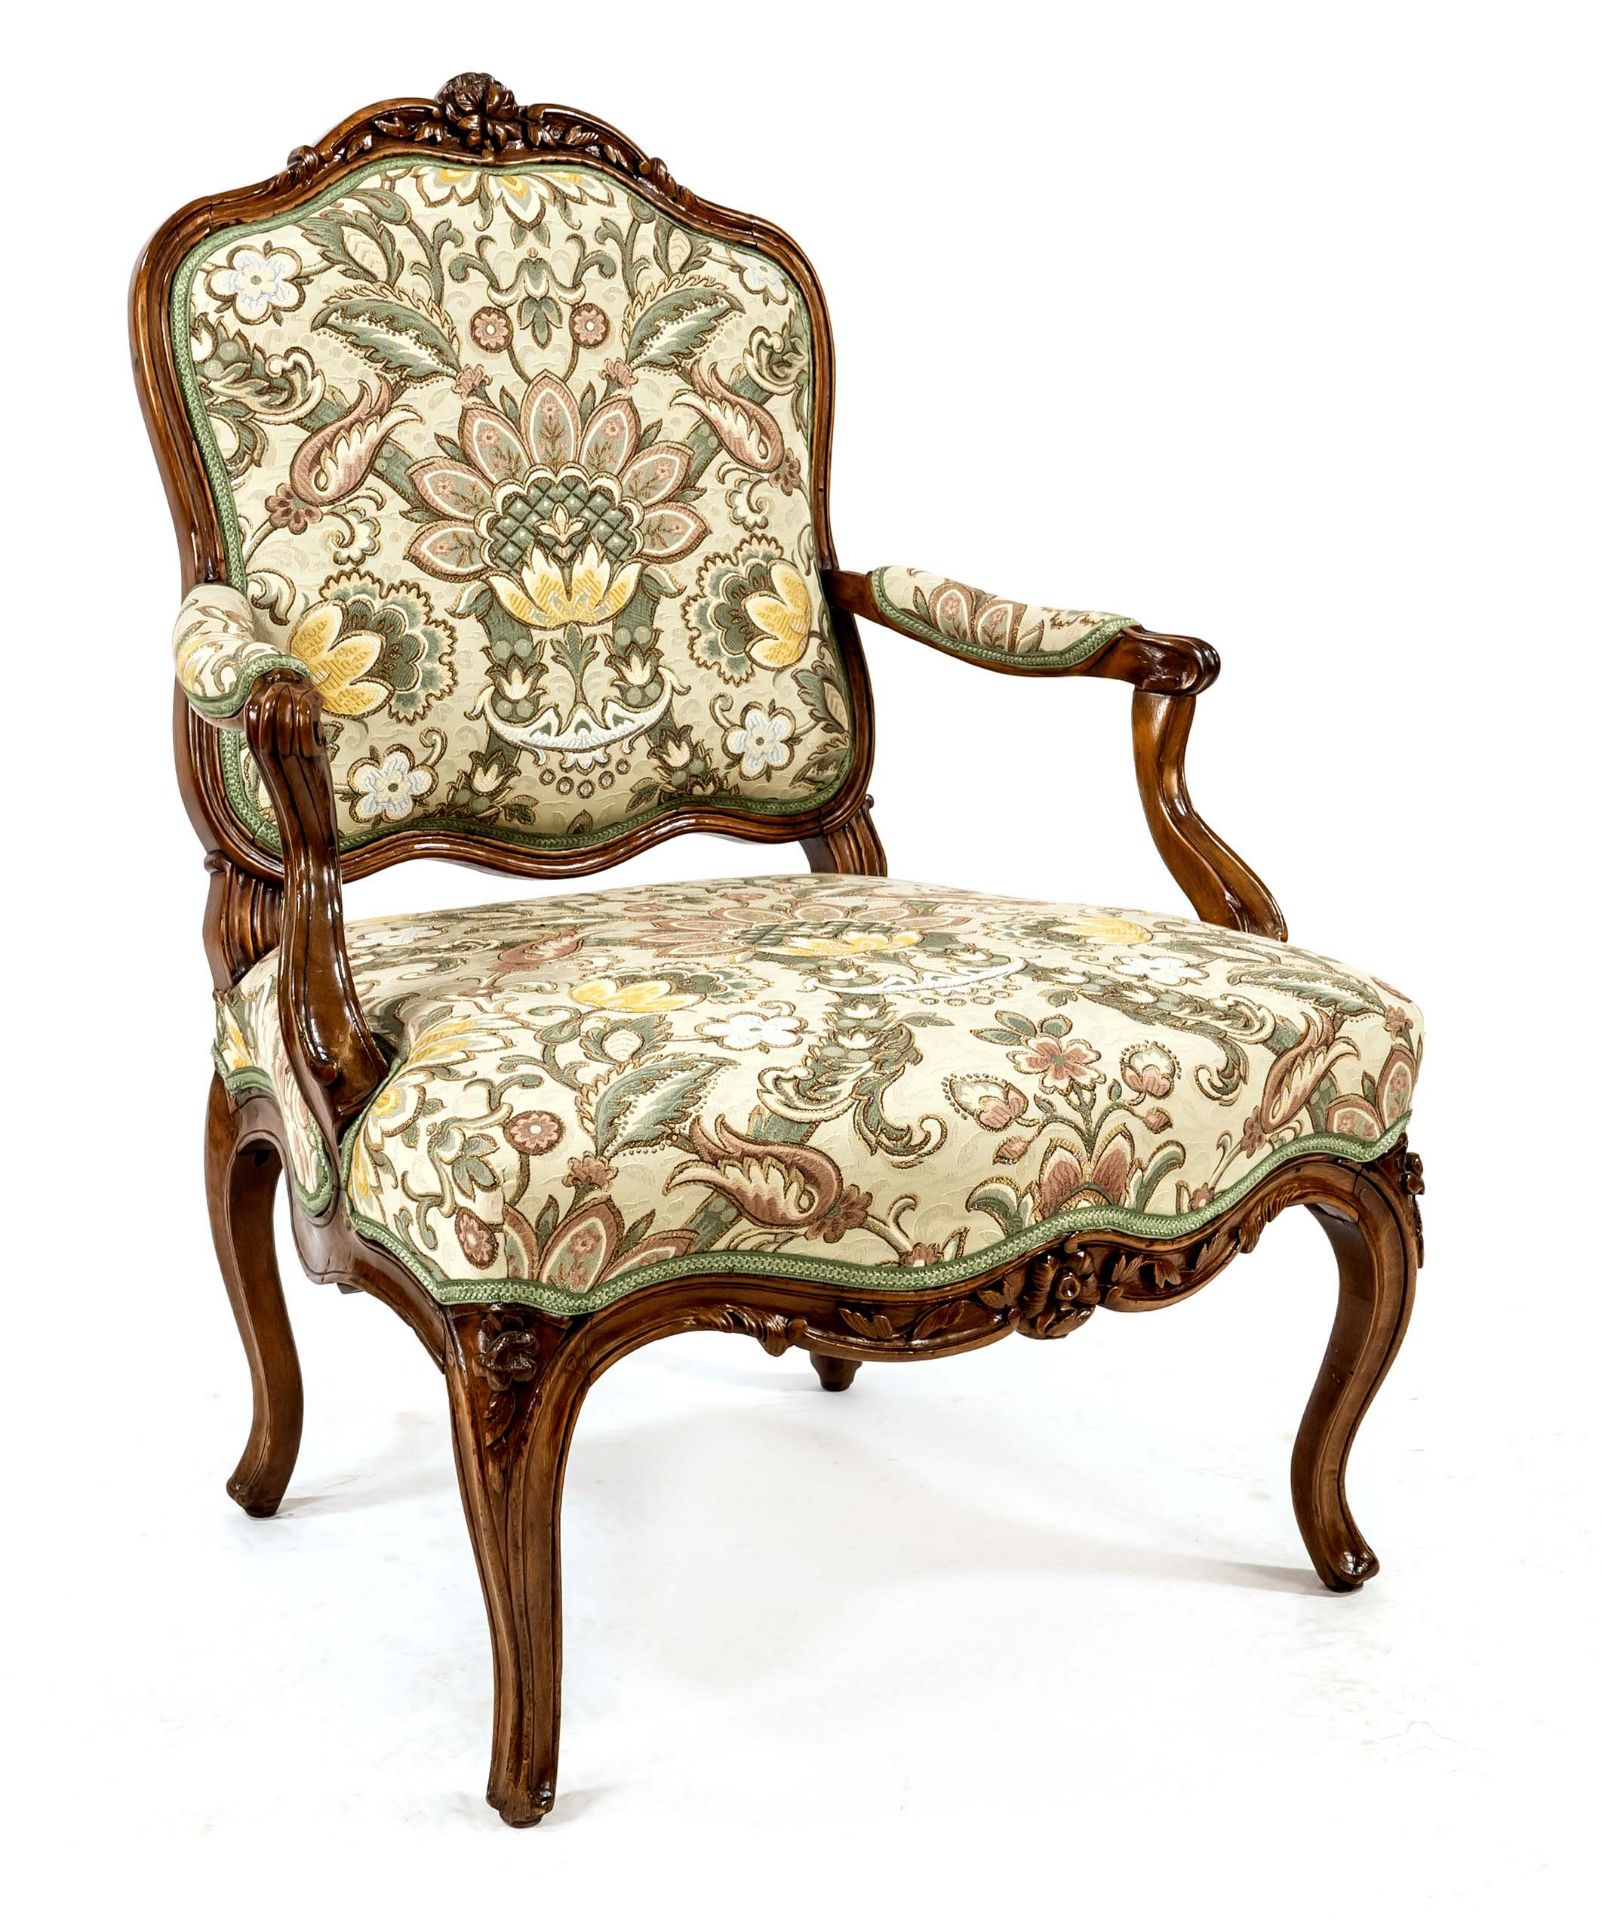 Baroque armchair, 18th century, solid walnut, curved and carved frame, 97 x 71 x 65 cm.